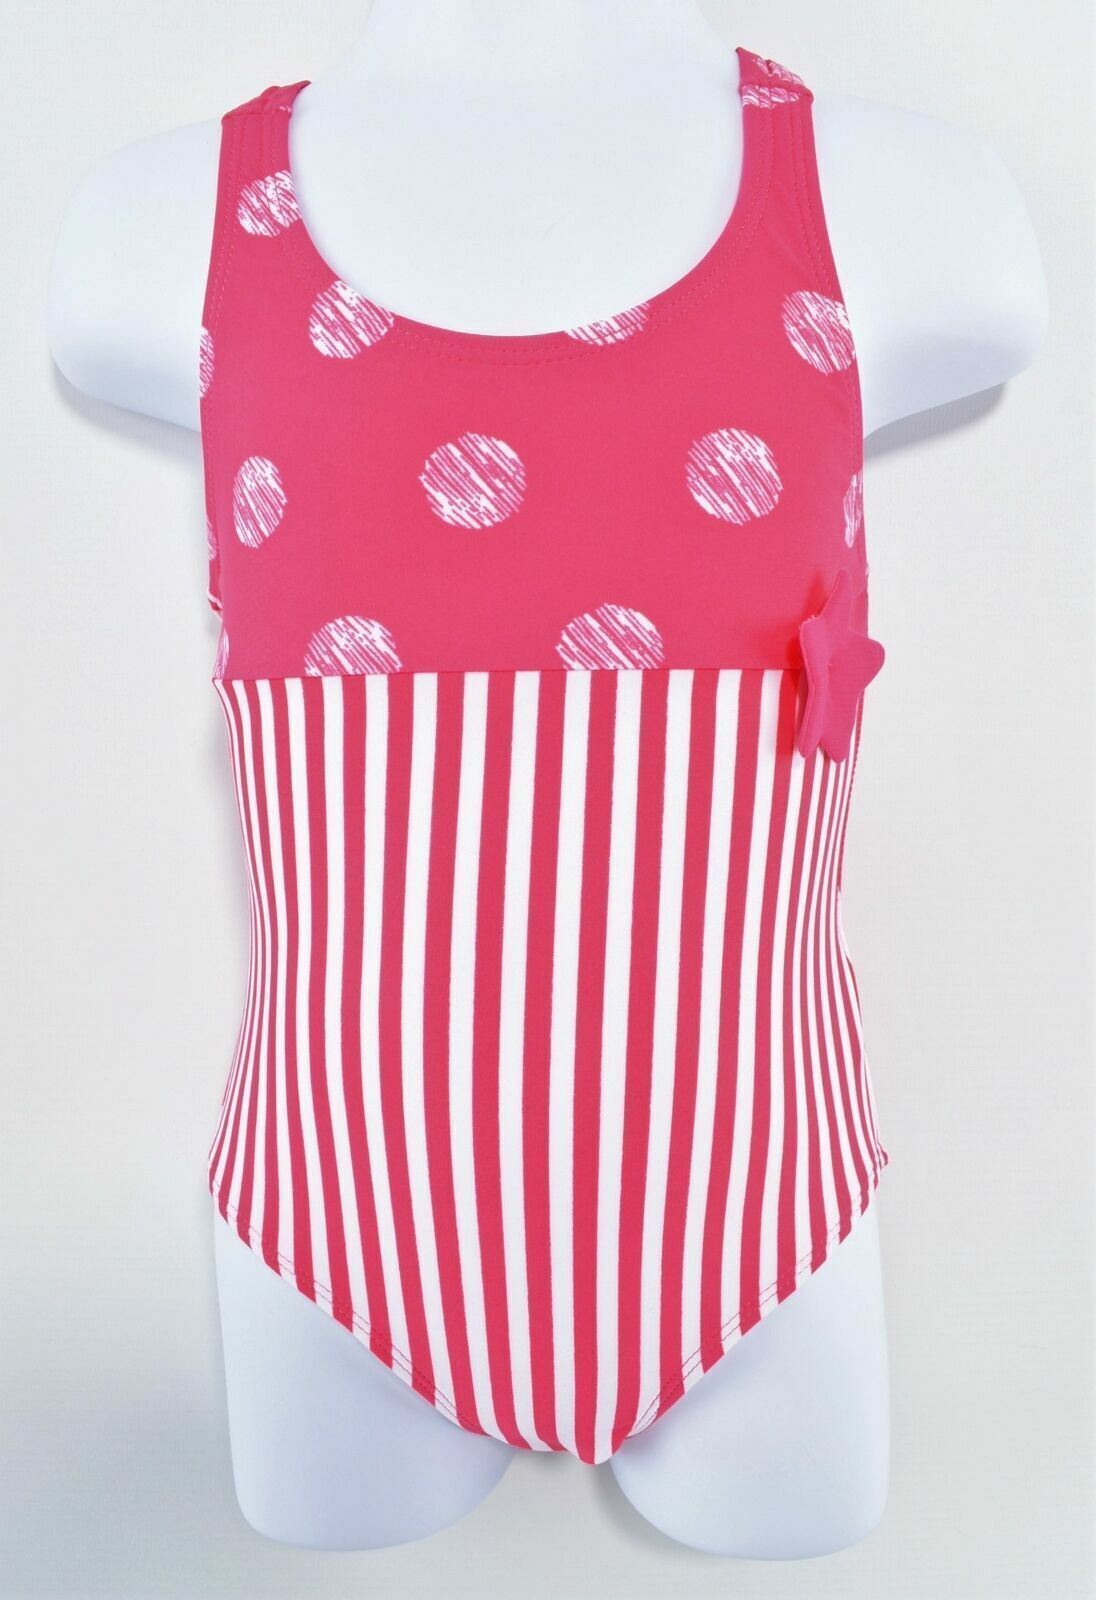 BELLYBUTTON Baby Girls Pink/White Striped One Piece Swimsuit 12 m to 18 months